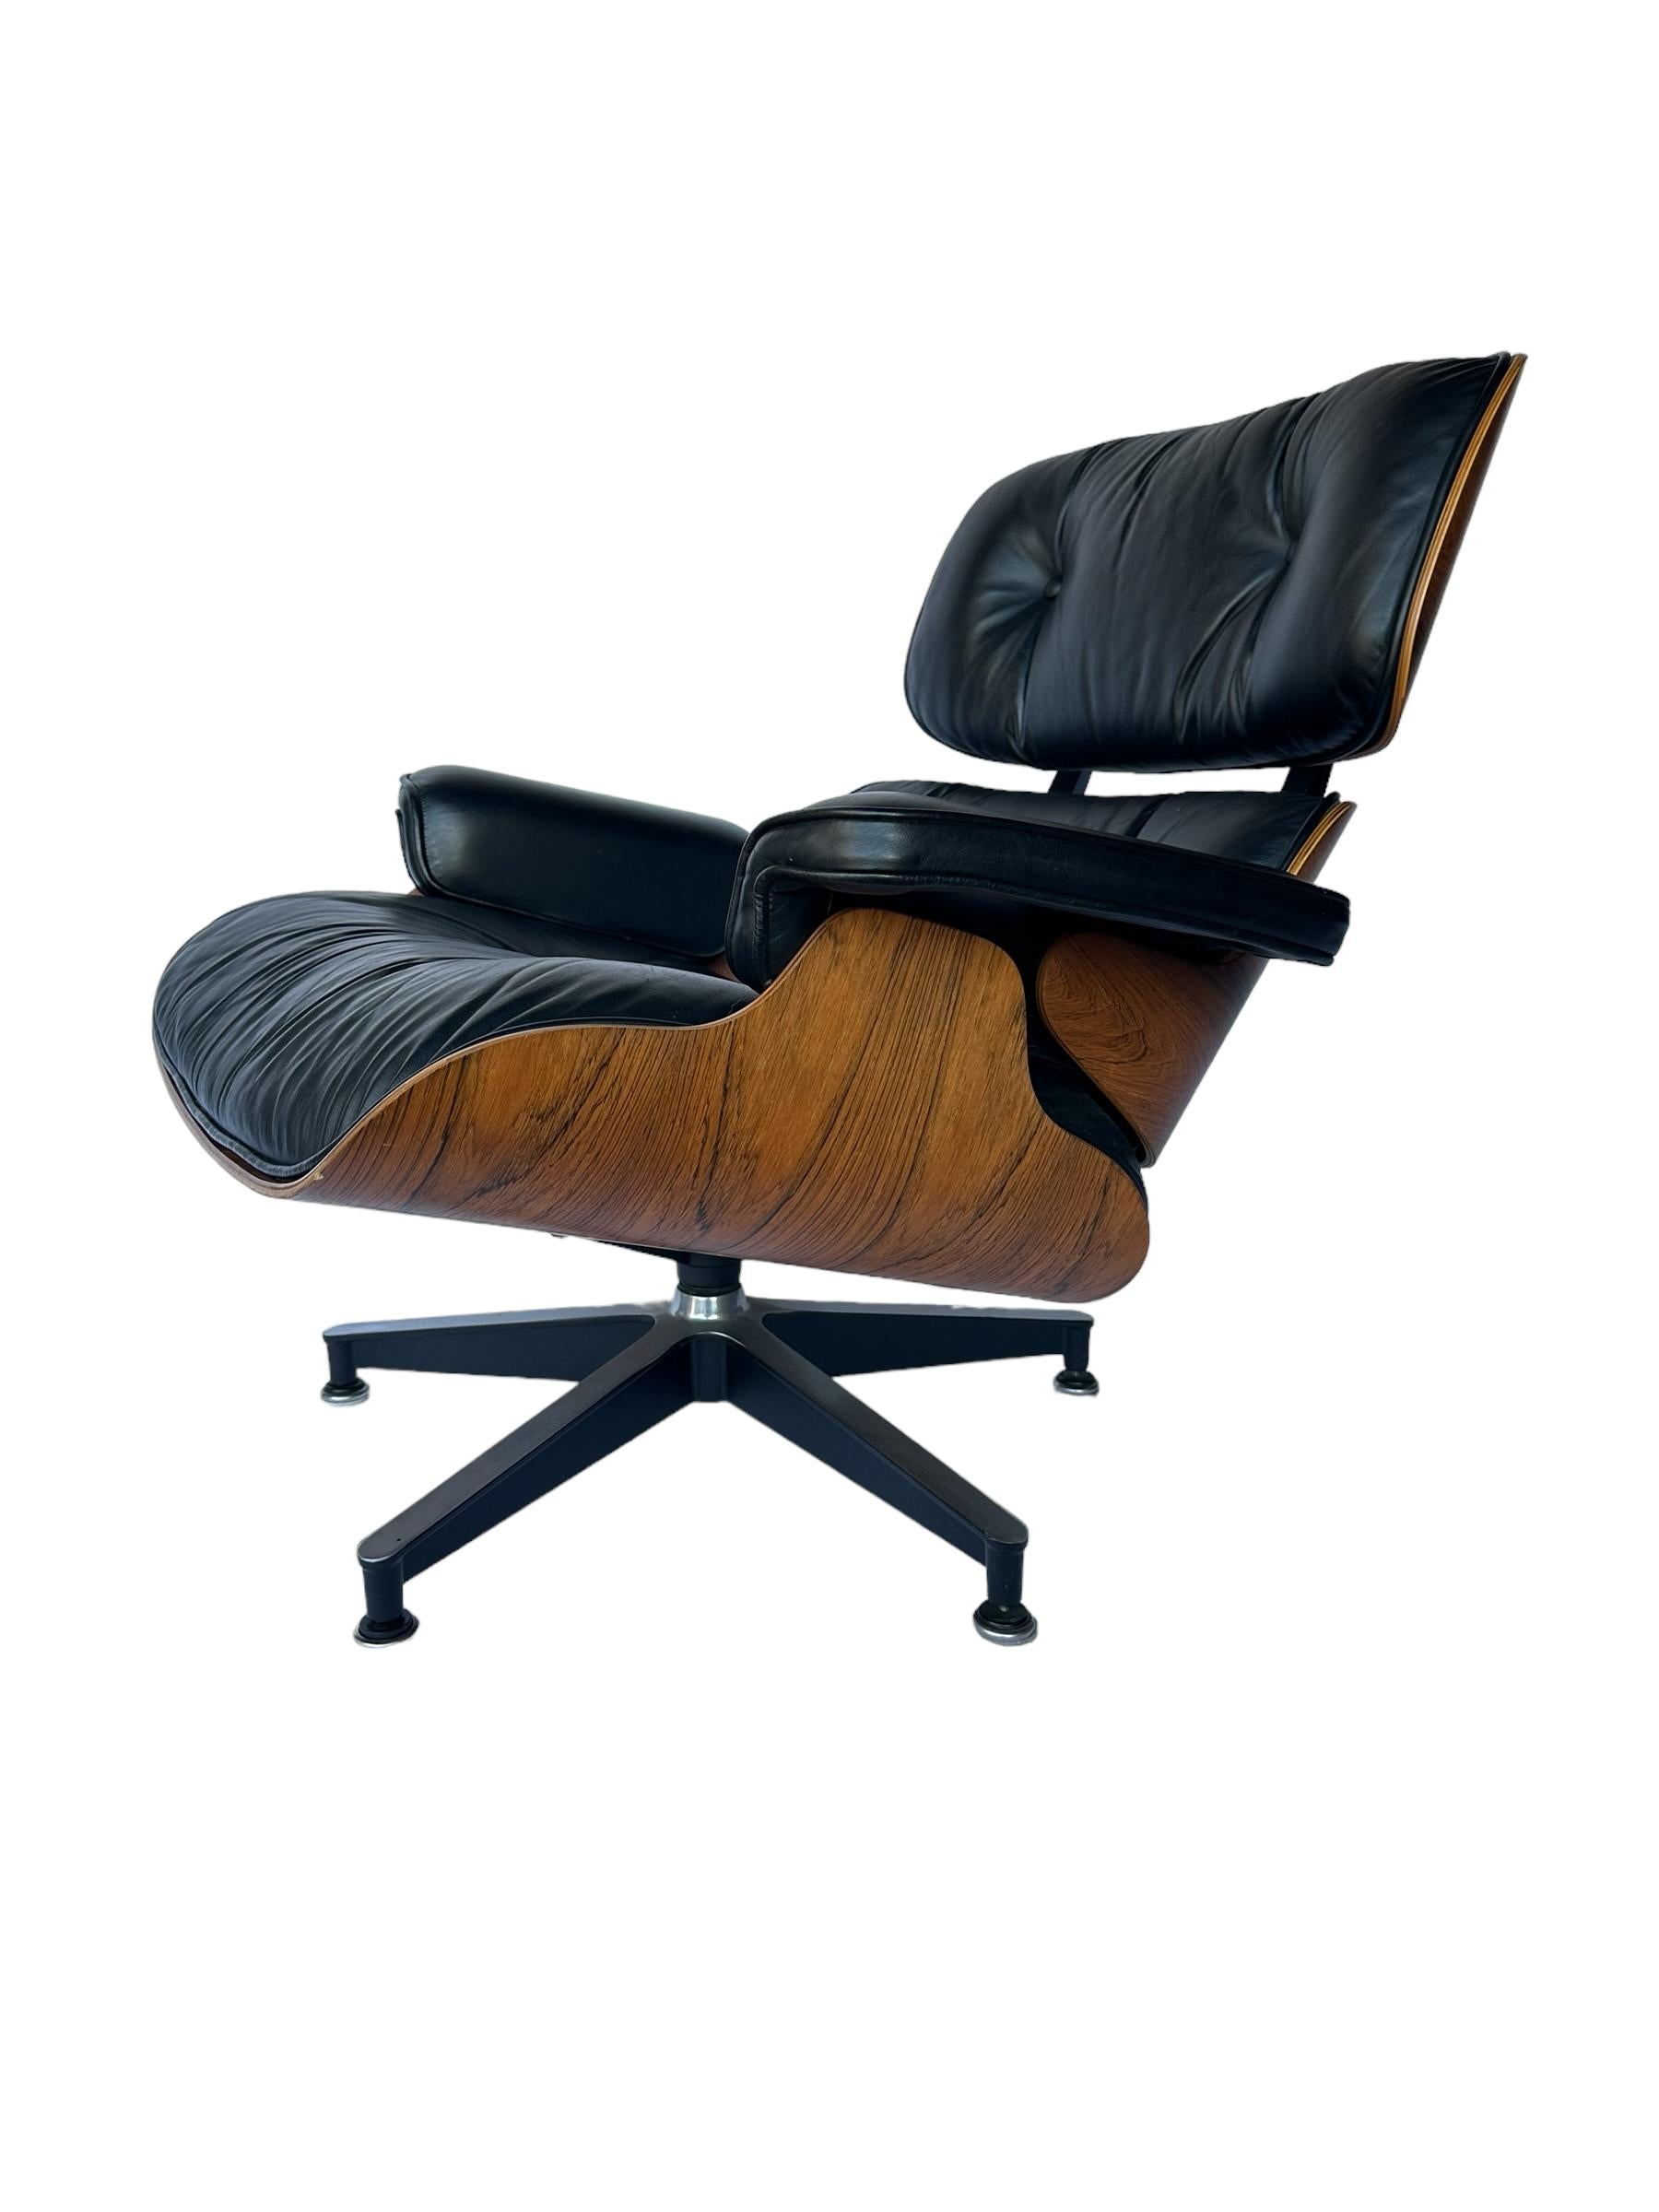 Restored 1970s Rosewood Eames Lounge Chair and Ottoman by Herman Miller For Sale 4